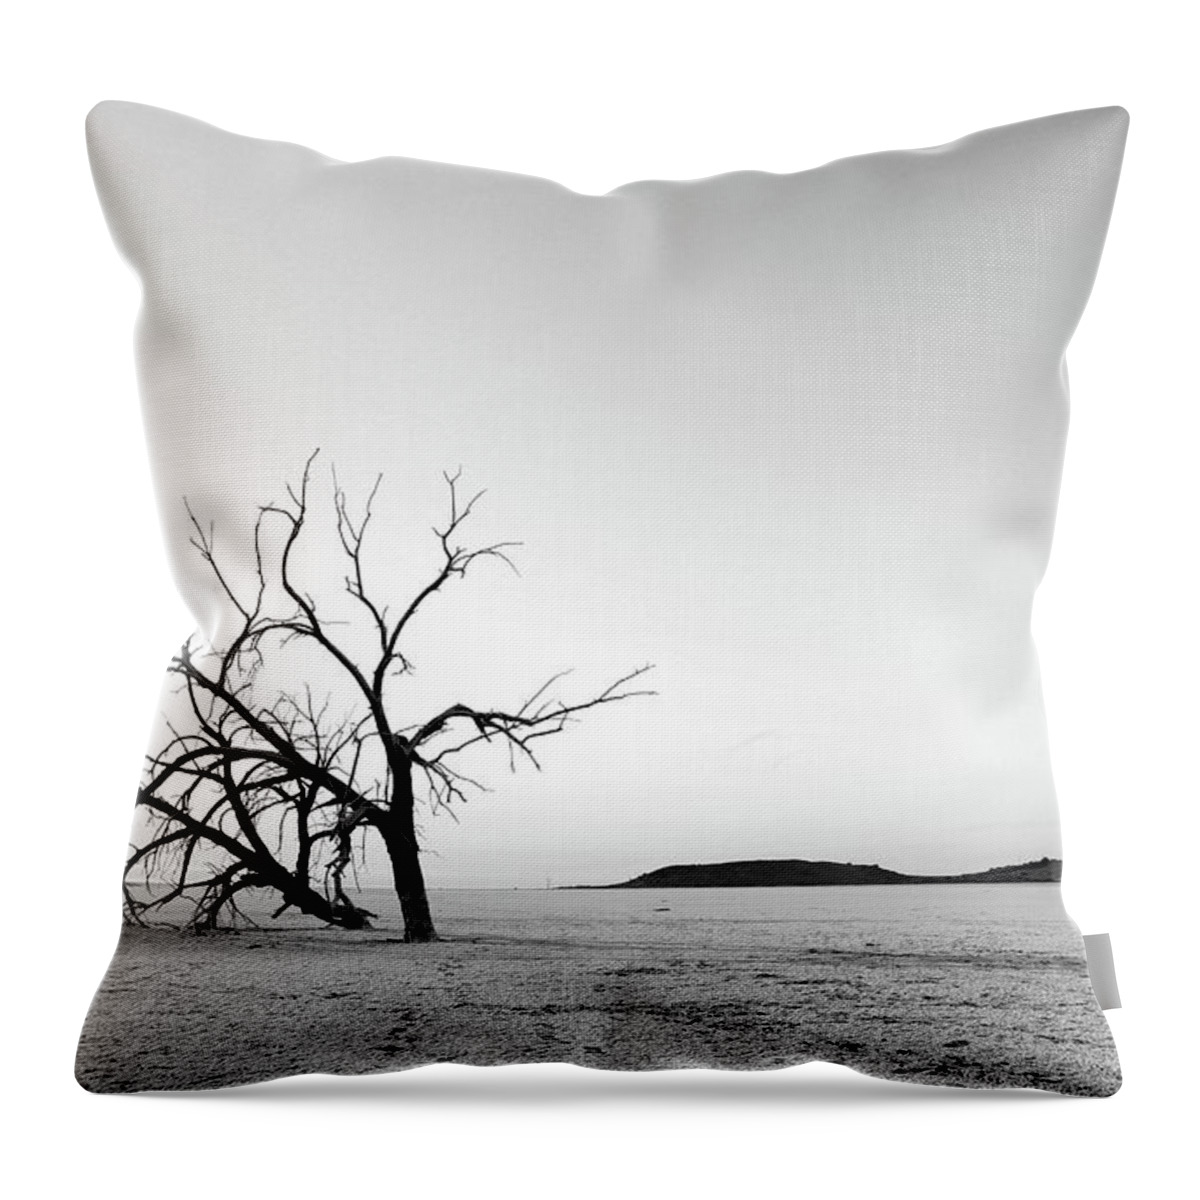 The End Throw Pillow featuring the photograph Lone Tree At Sea by Eric A Norris